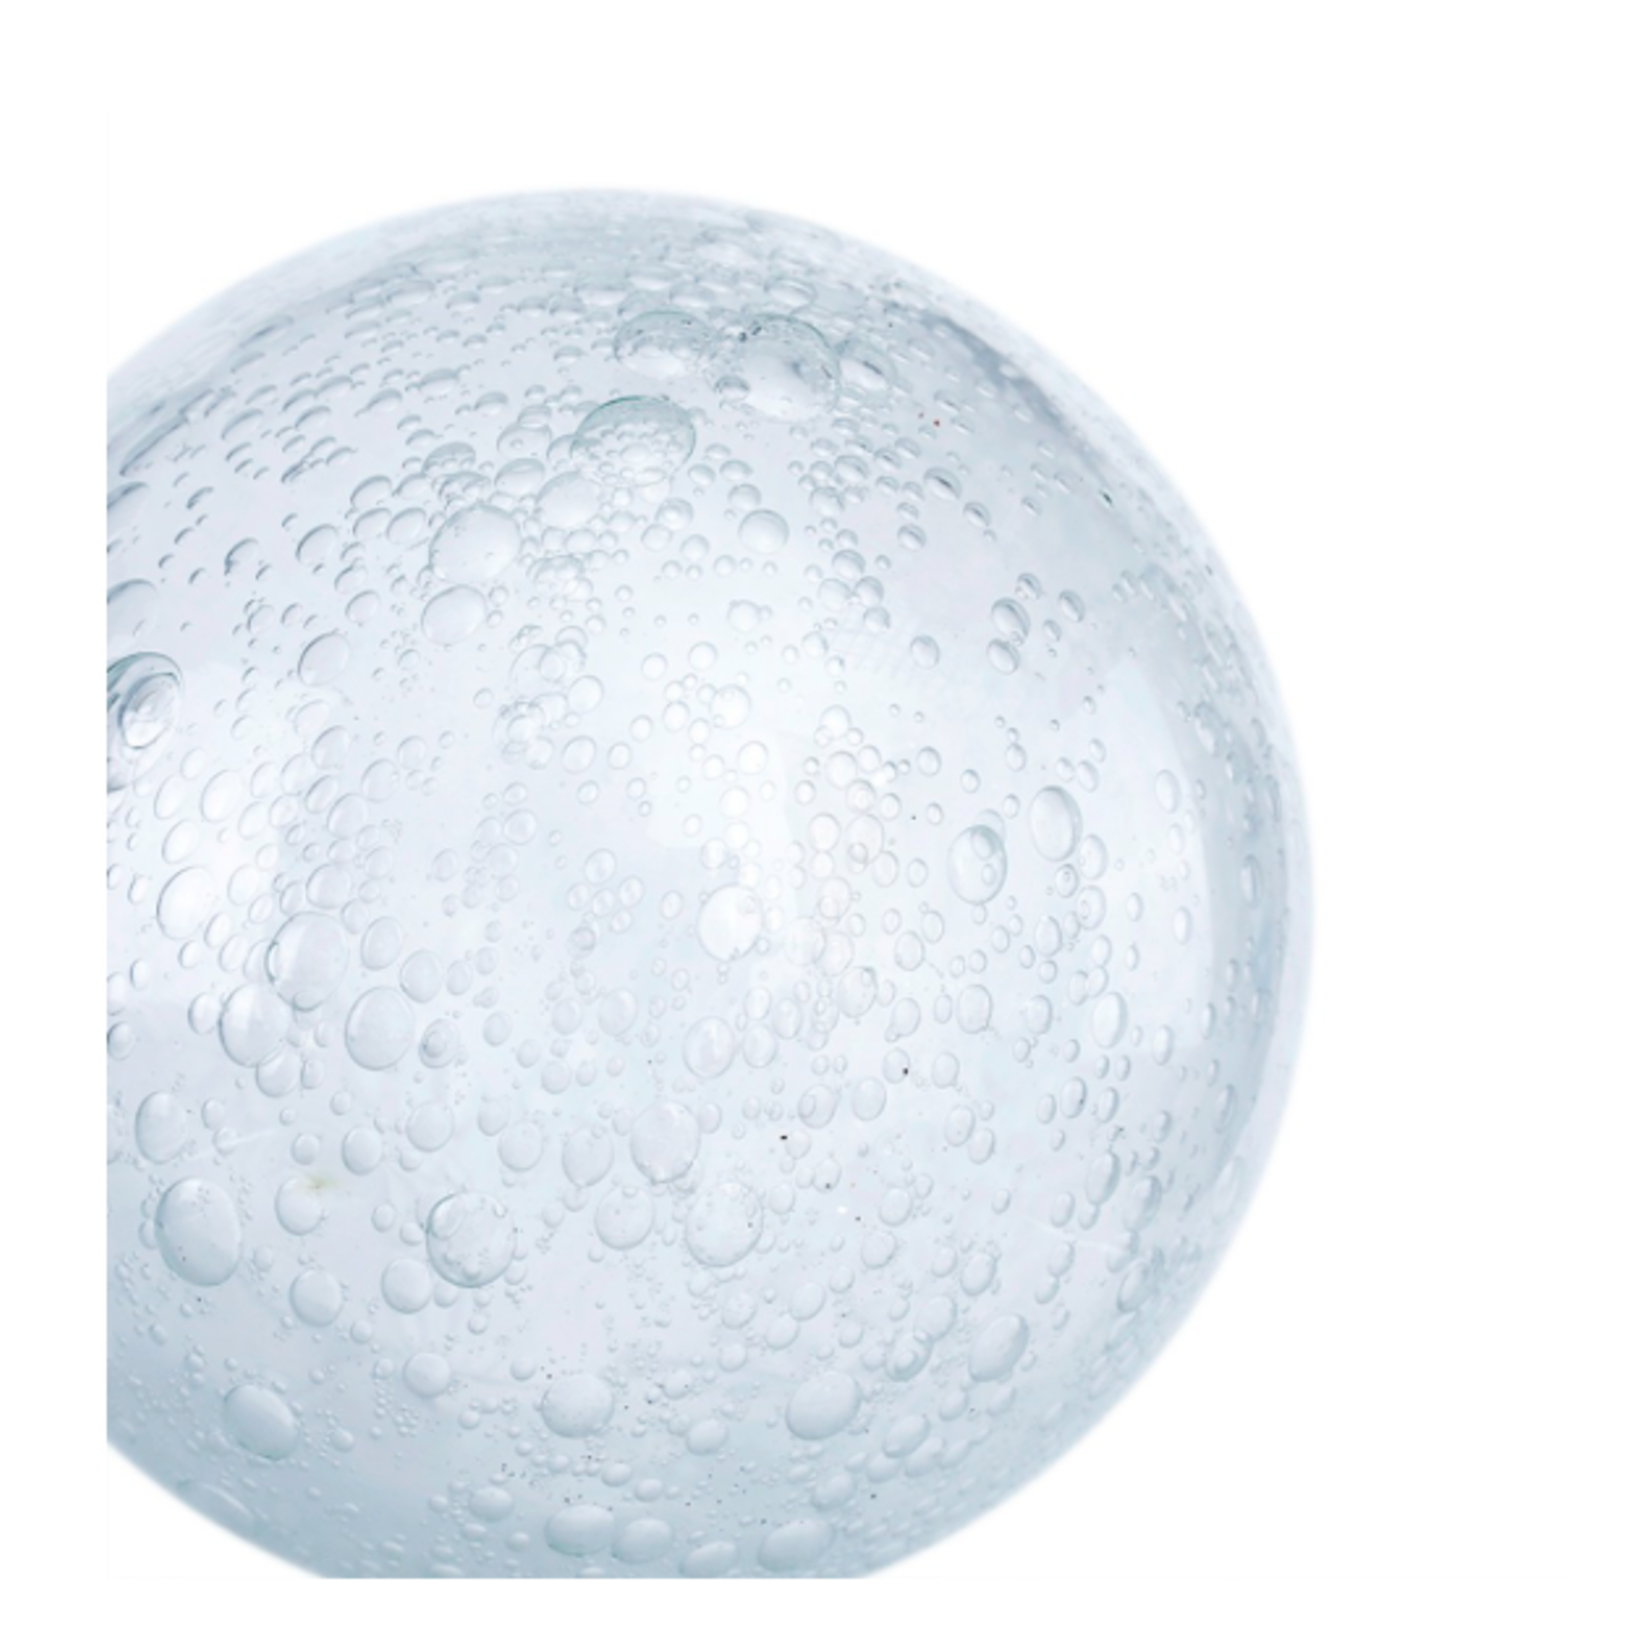 40% off was$8 now $4.79 now 3”D CLEAR DECORATIVE GLASS BALL SPHERE